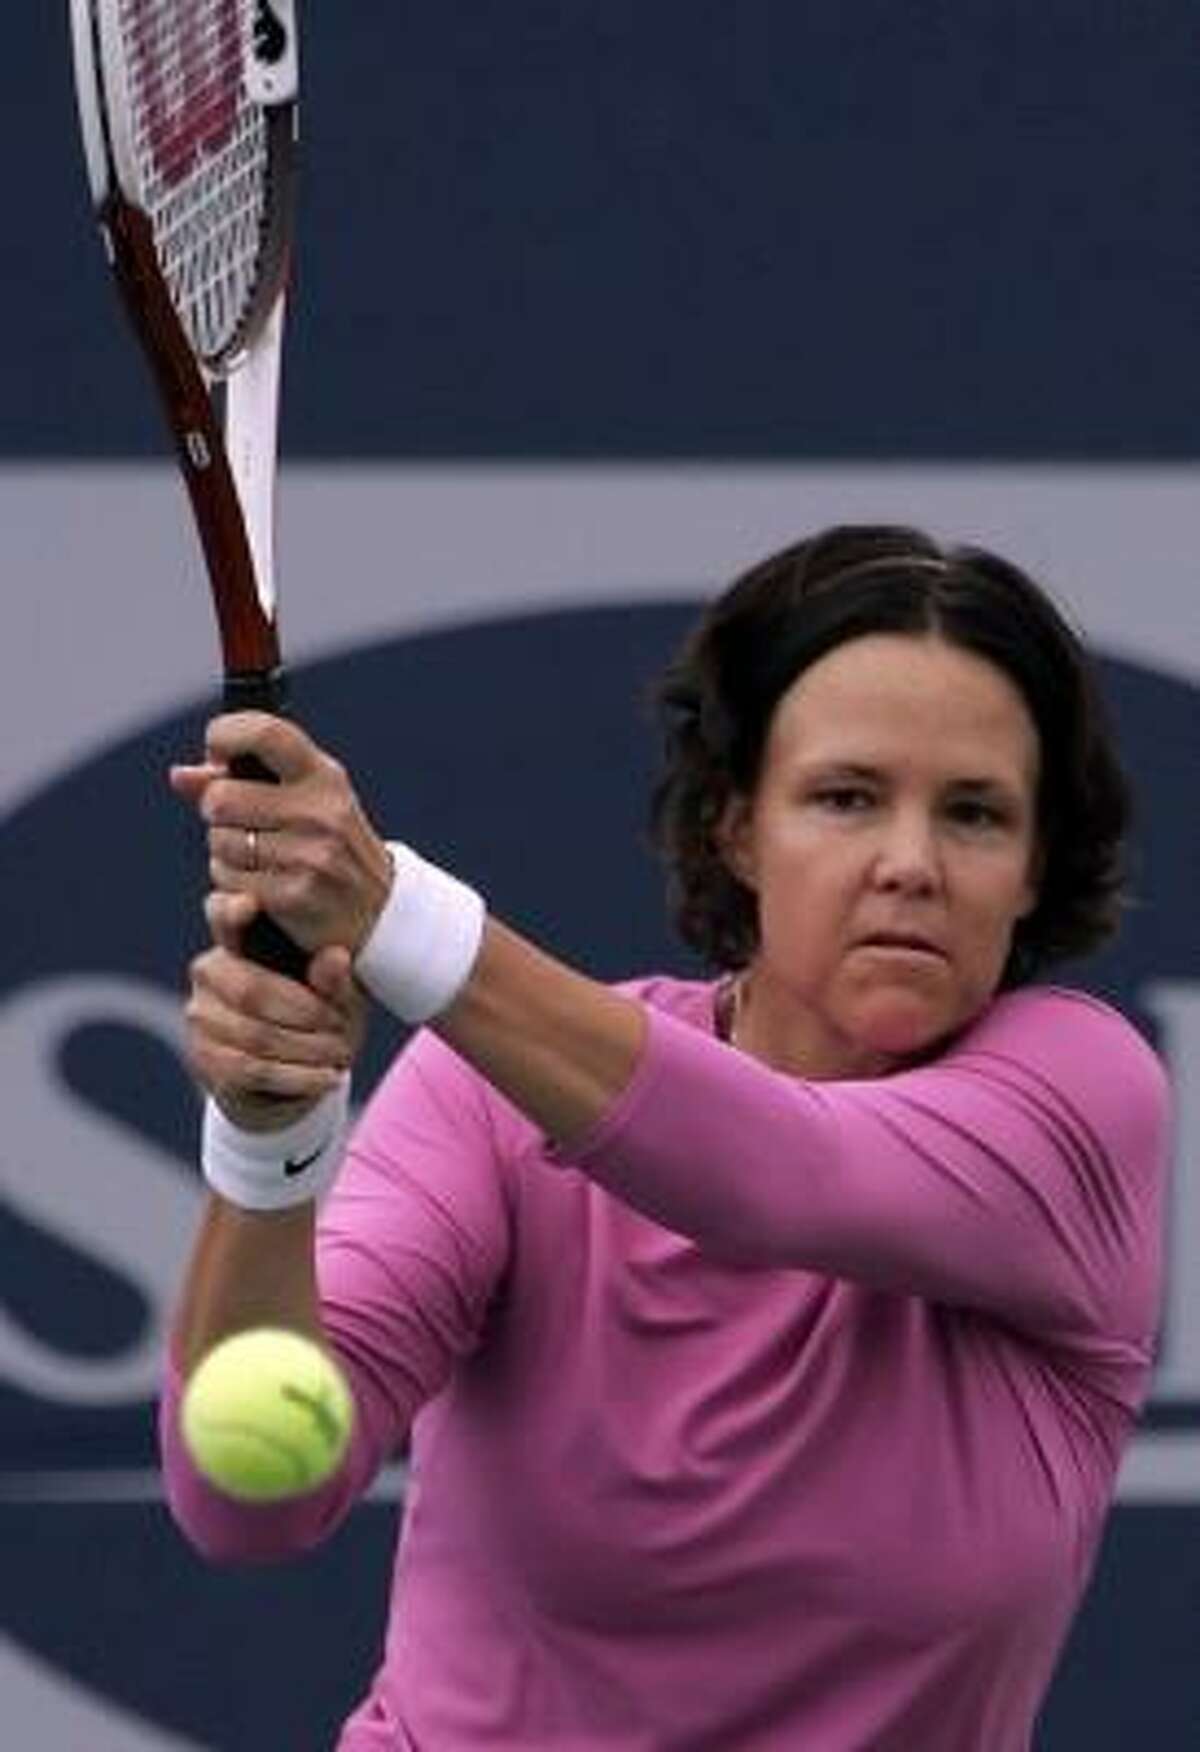 Lindsay Davenport returns to the court for her first match in almost a year Wednesday at the Pilot Penn in New Haven, Conn., after taking time off to have a child. Davenport and partner Lisa Raymond lost Cara Black and Liezel Huber 6-7 (1), 6-3 and 10-4 in the match tiebreaker .